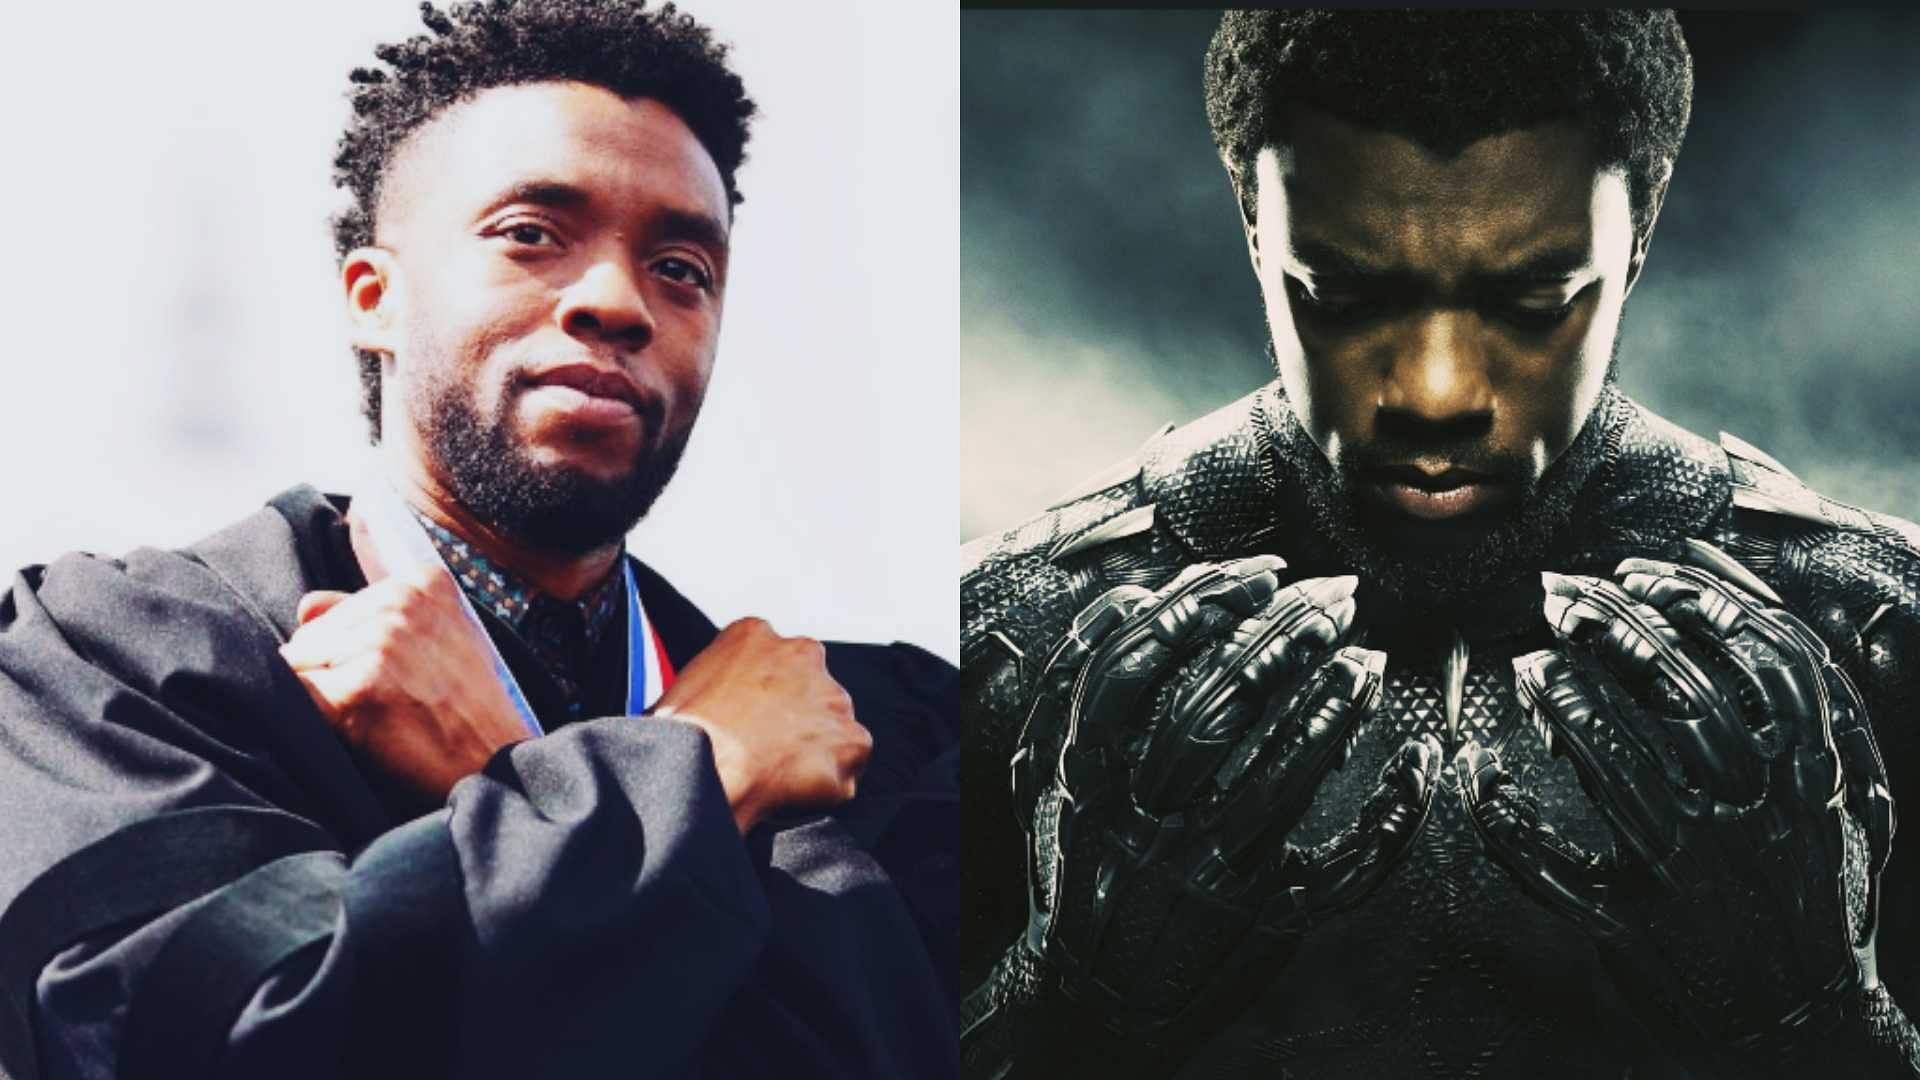 We will love you forever': Twitter bids adieu to 'Black Panther' star Chadwick Boseman